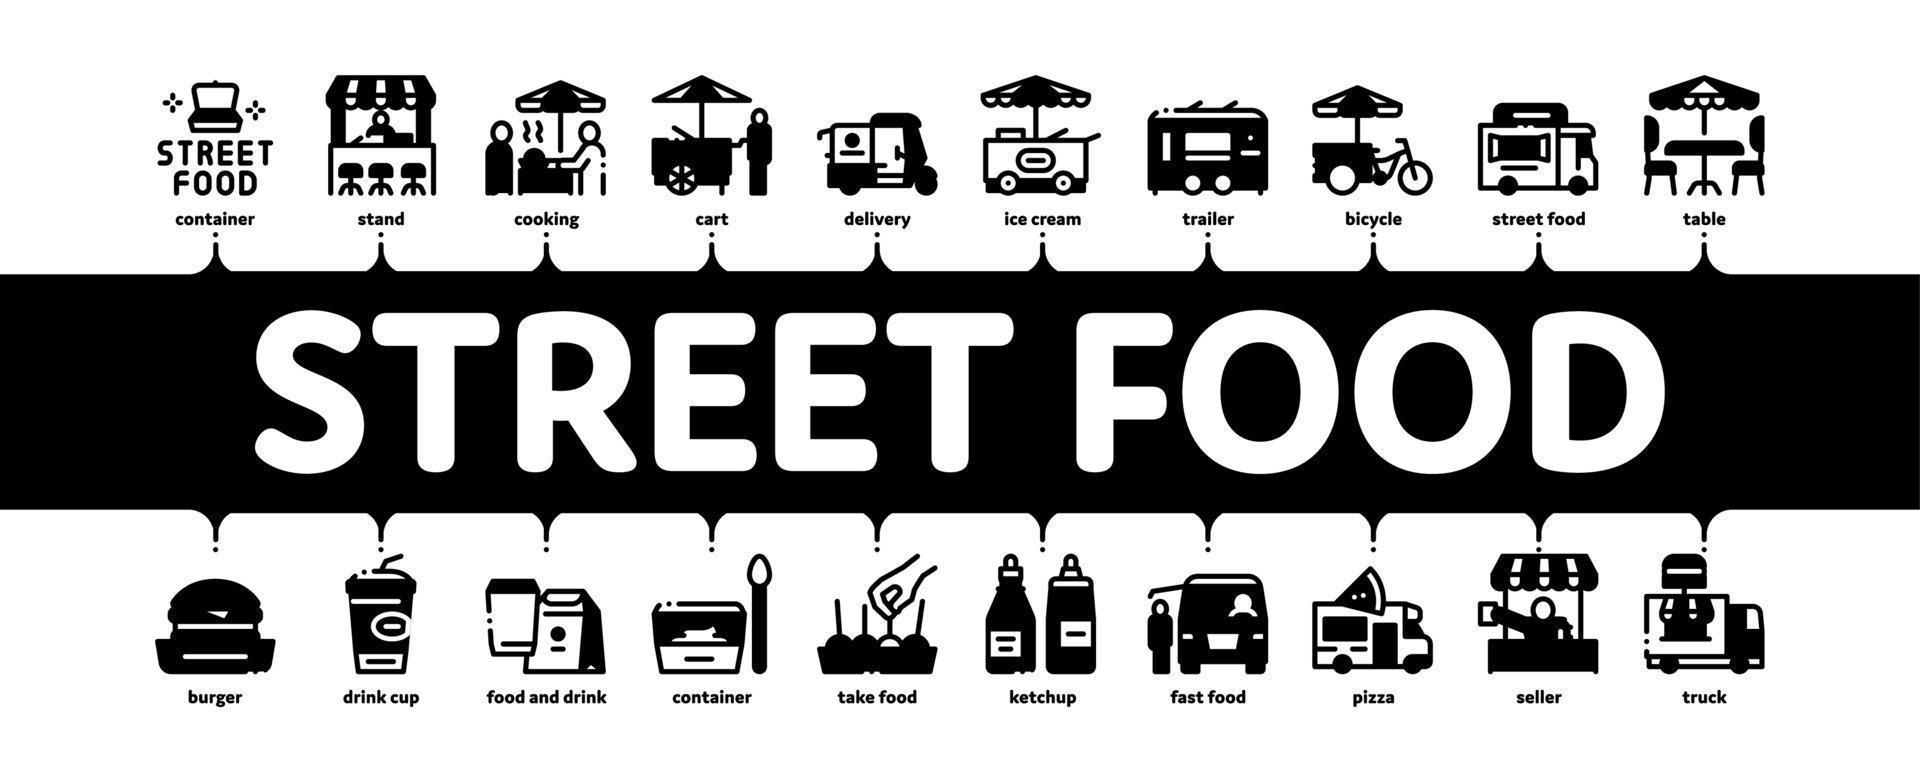 Street Food And Drink Minimal Infographic Banner Vector